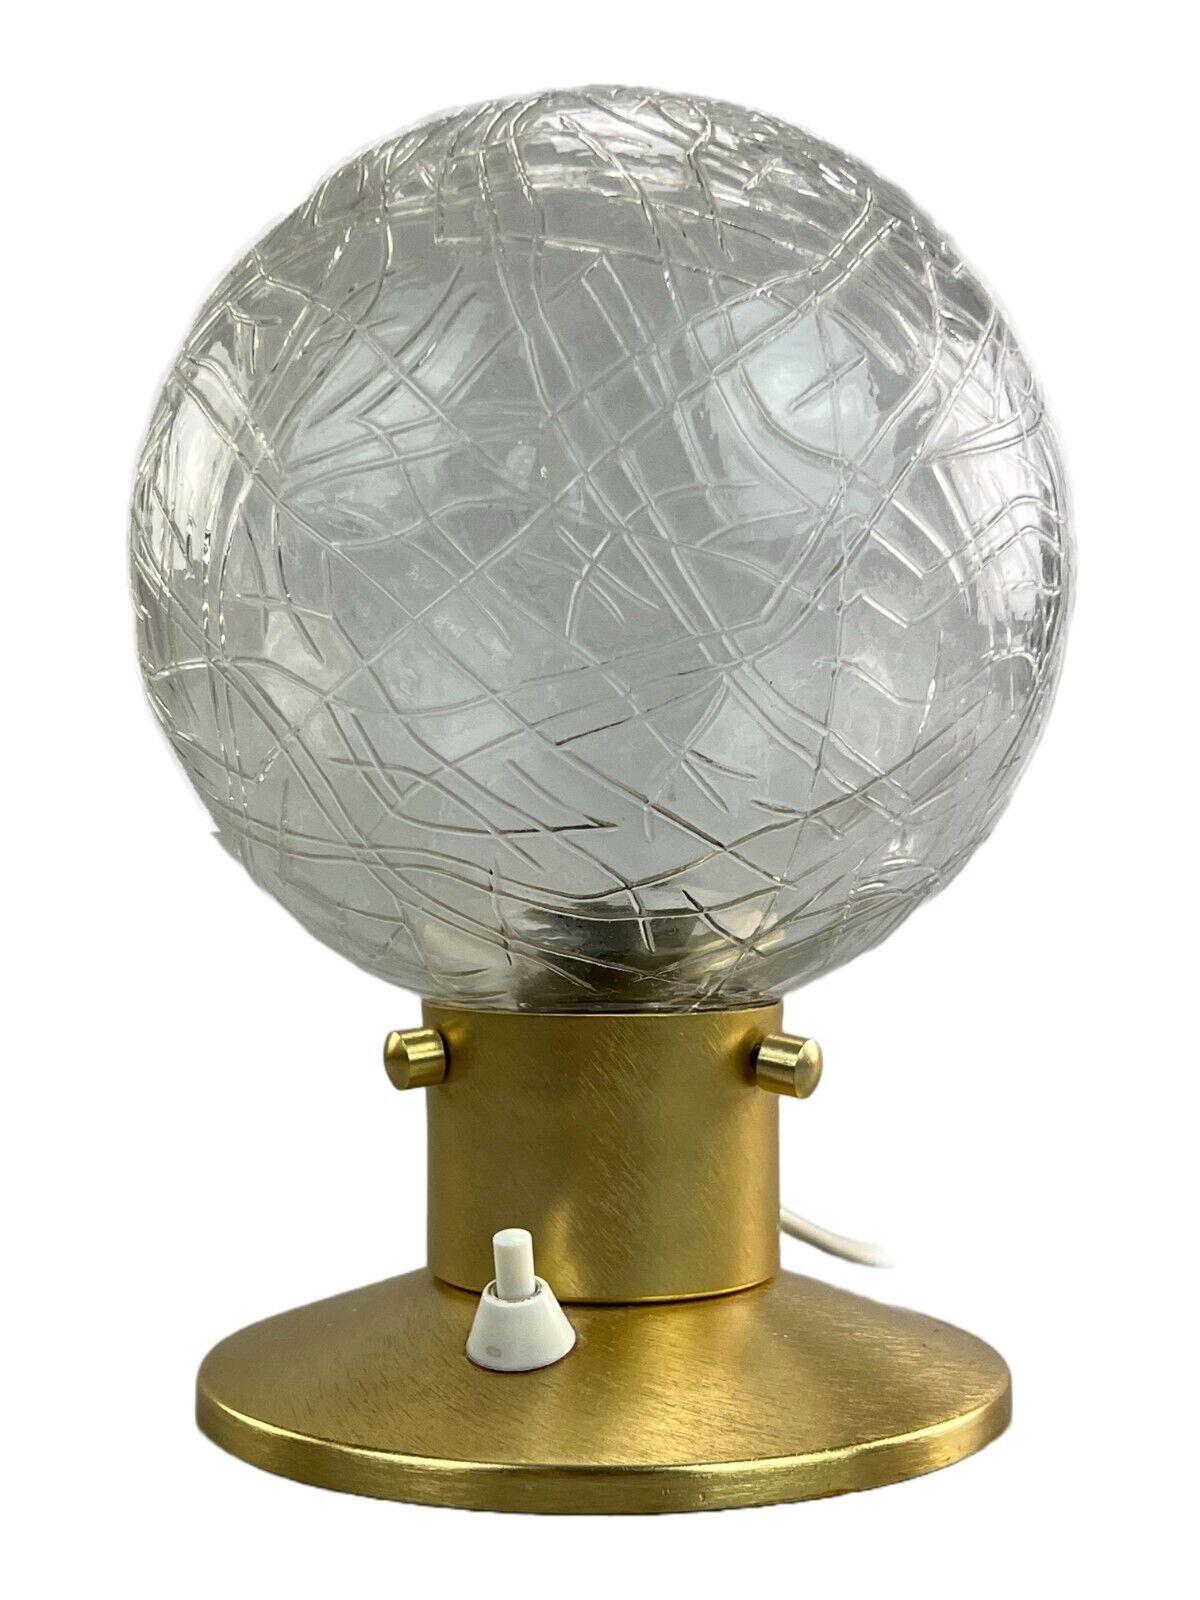 60s 70s Ball lamp light table lamp bedside lamp space age design.

Object: table lamp

Manufacturer:

Condition: good

Age: around 1960-1970

Dimensions:

Diameter = 16cm
Height = 22cm

Other notes:

E14 socket

The pictures serve